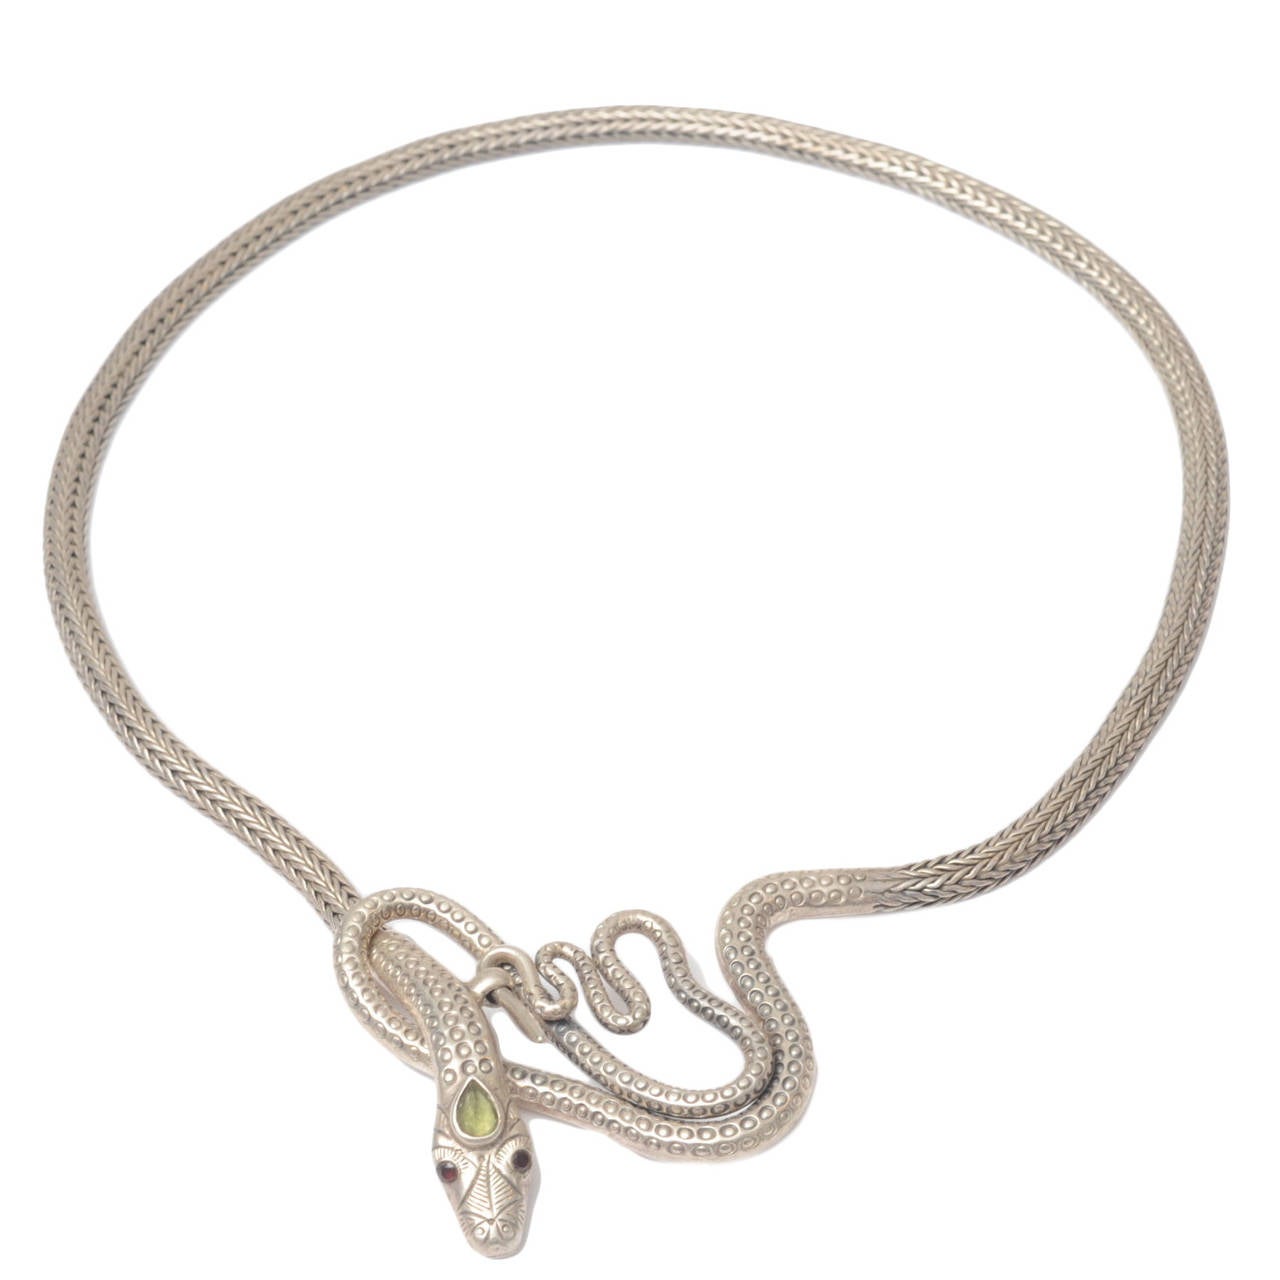 Woven Sterling Silver Snake Necklace with Peridot Third Eye